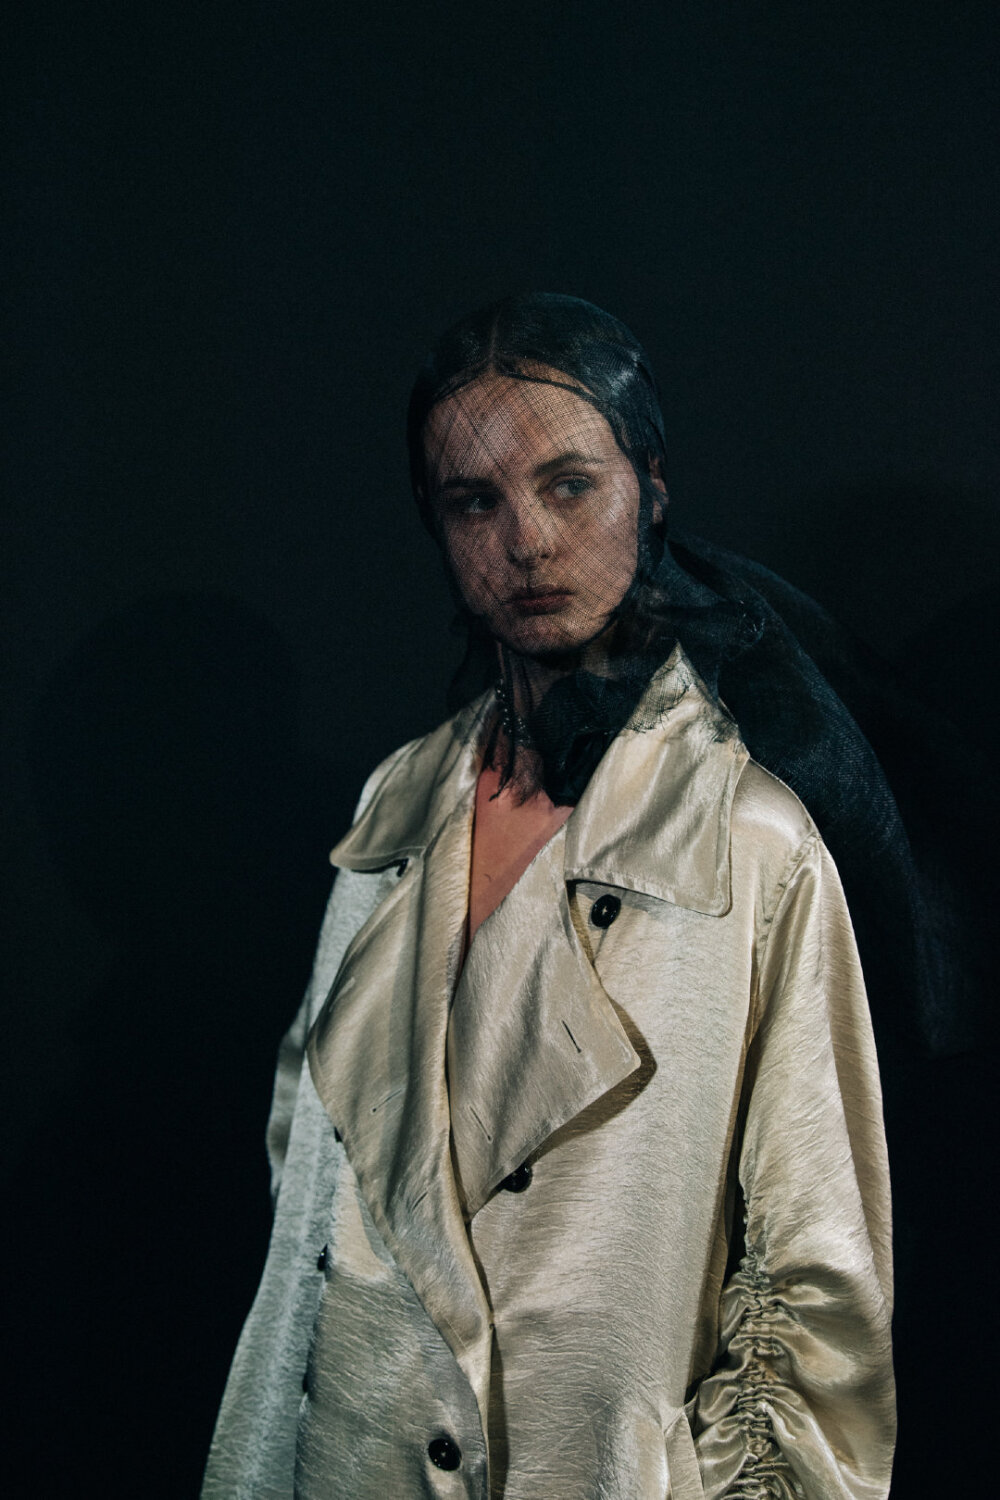 Backstage at Ann Demeulemeester S/S 2019 ​​​